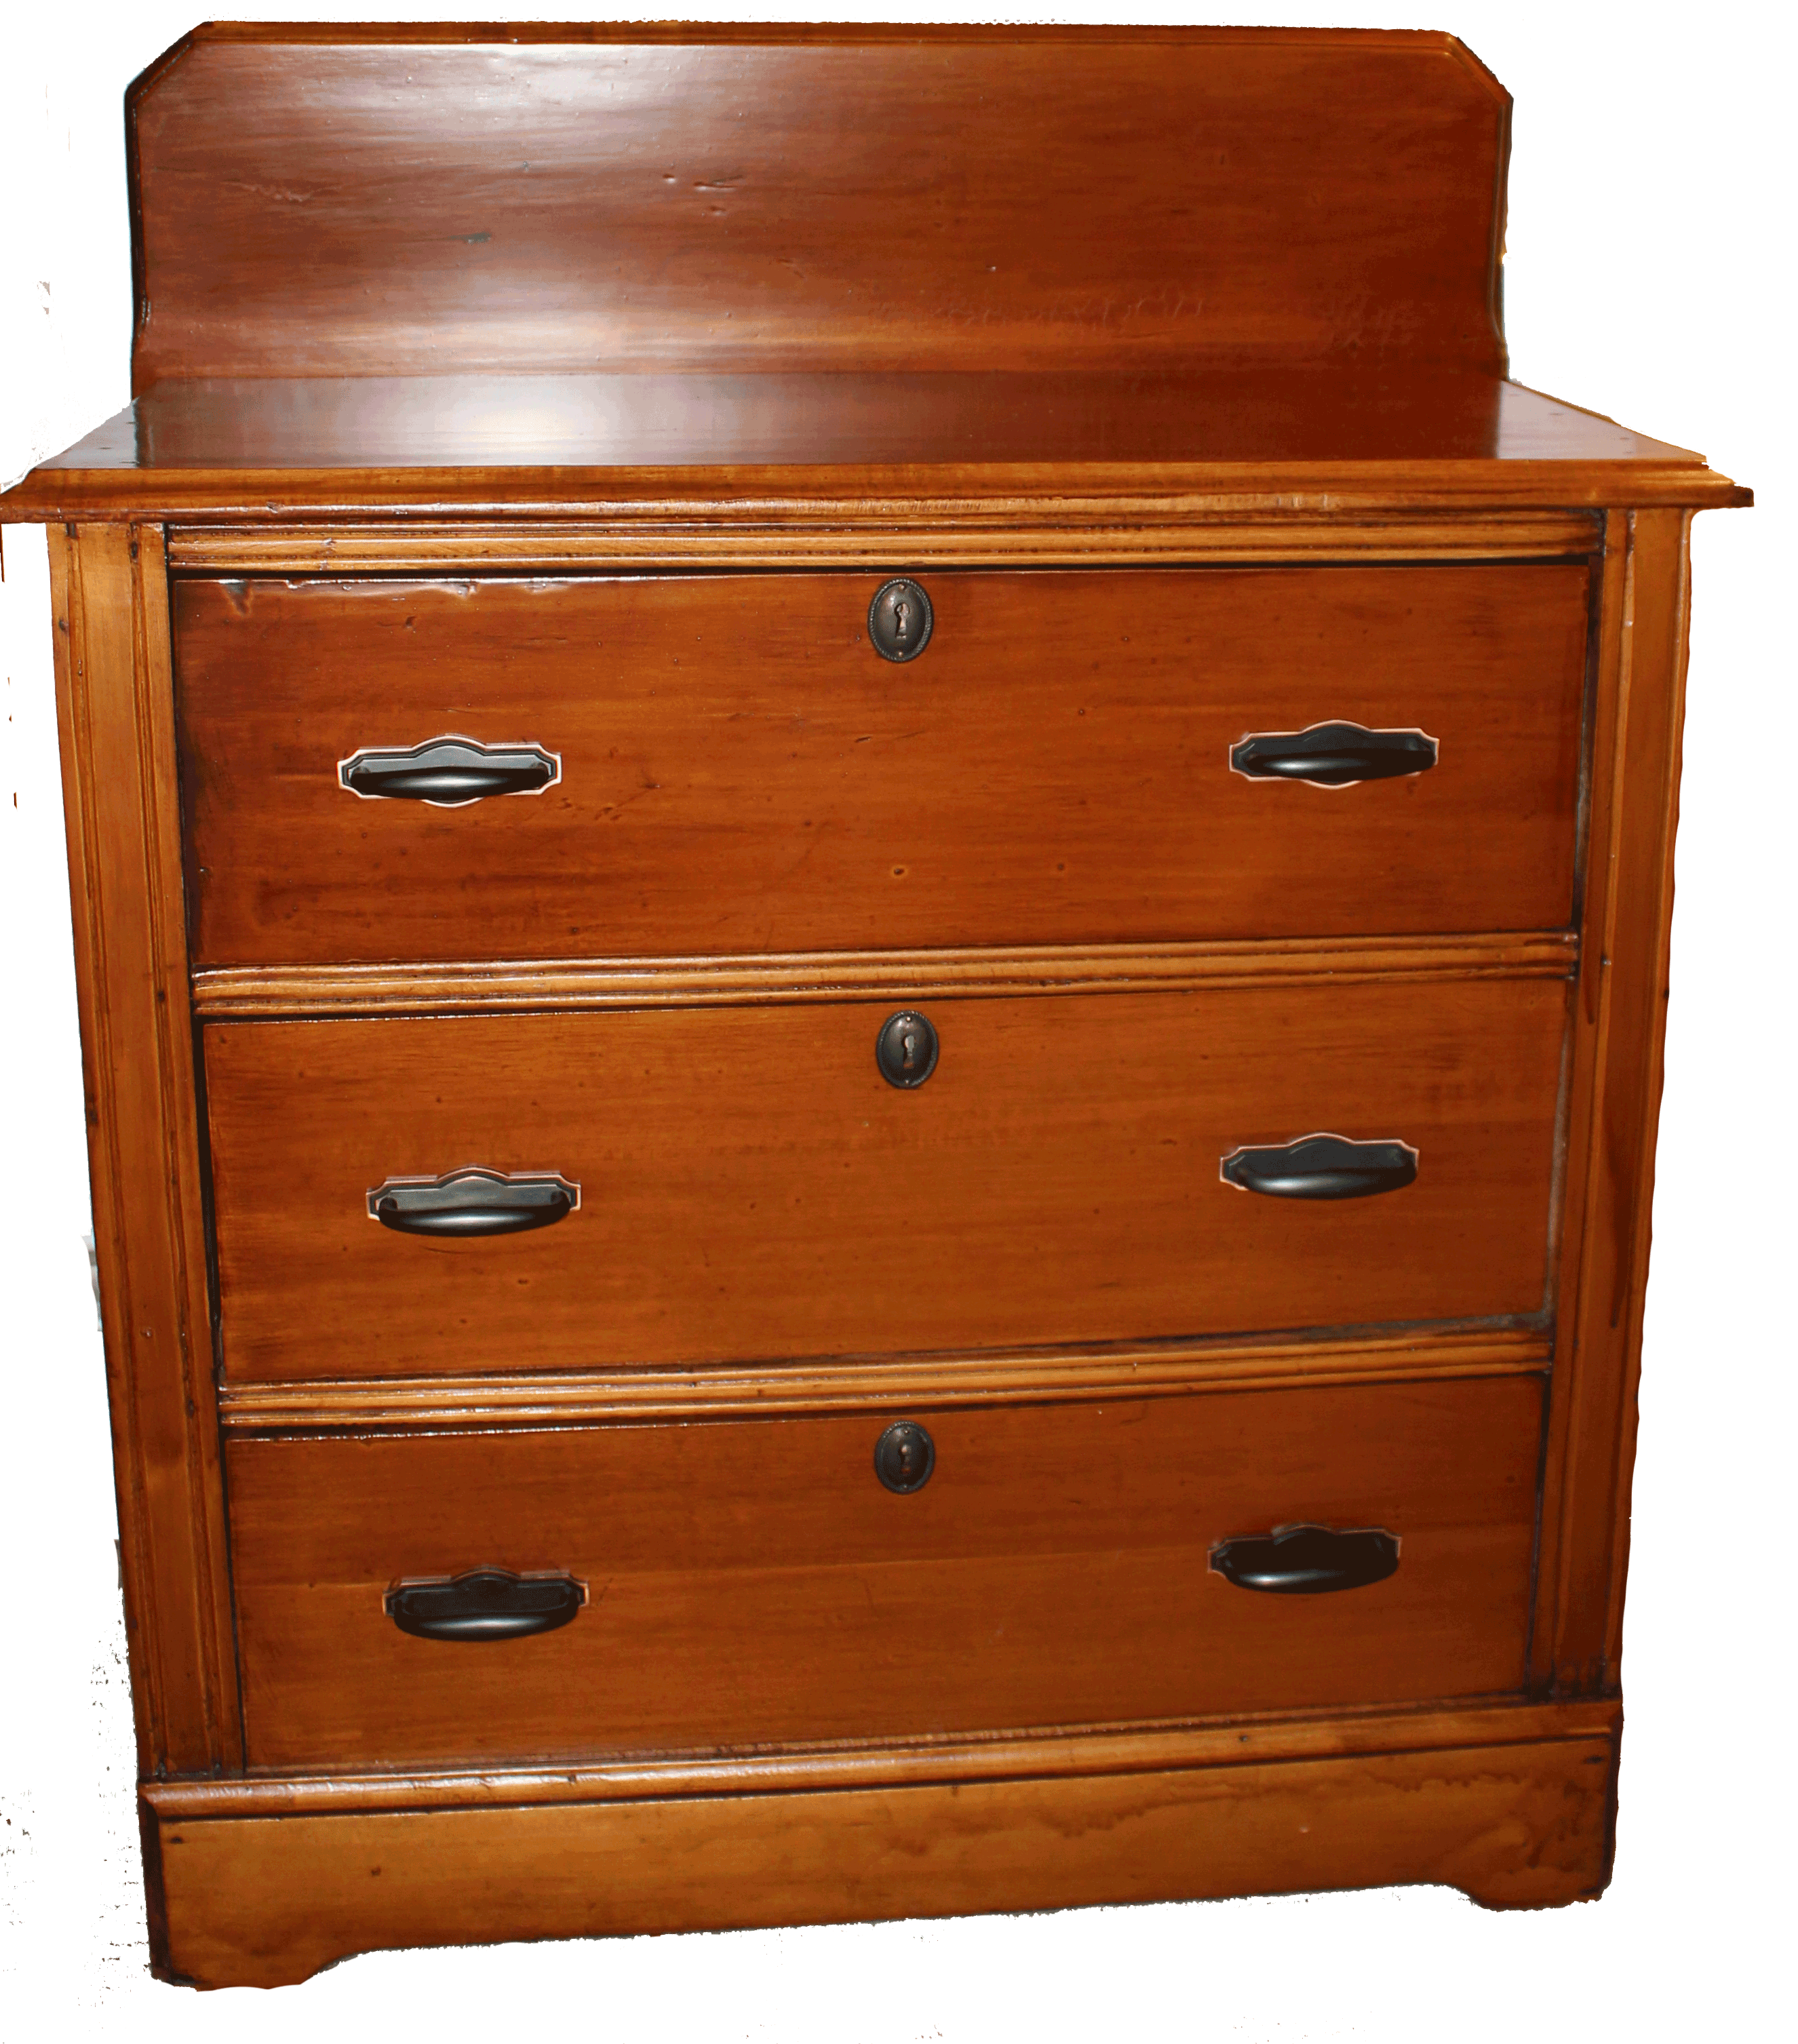 Refinished chest of drawers 